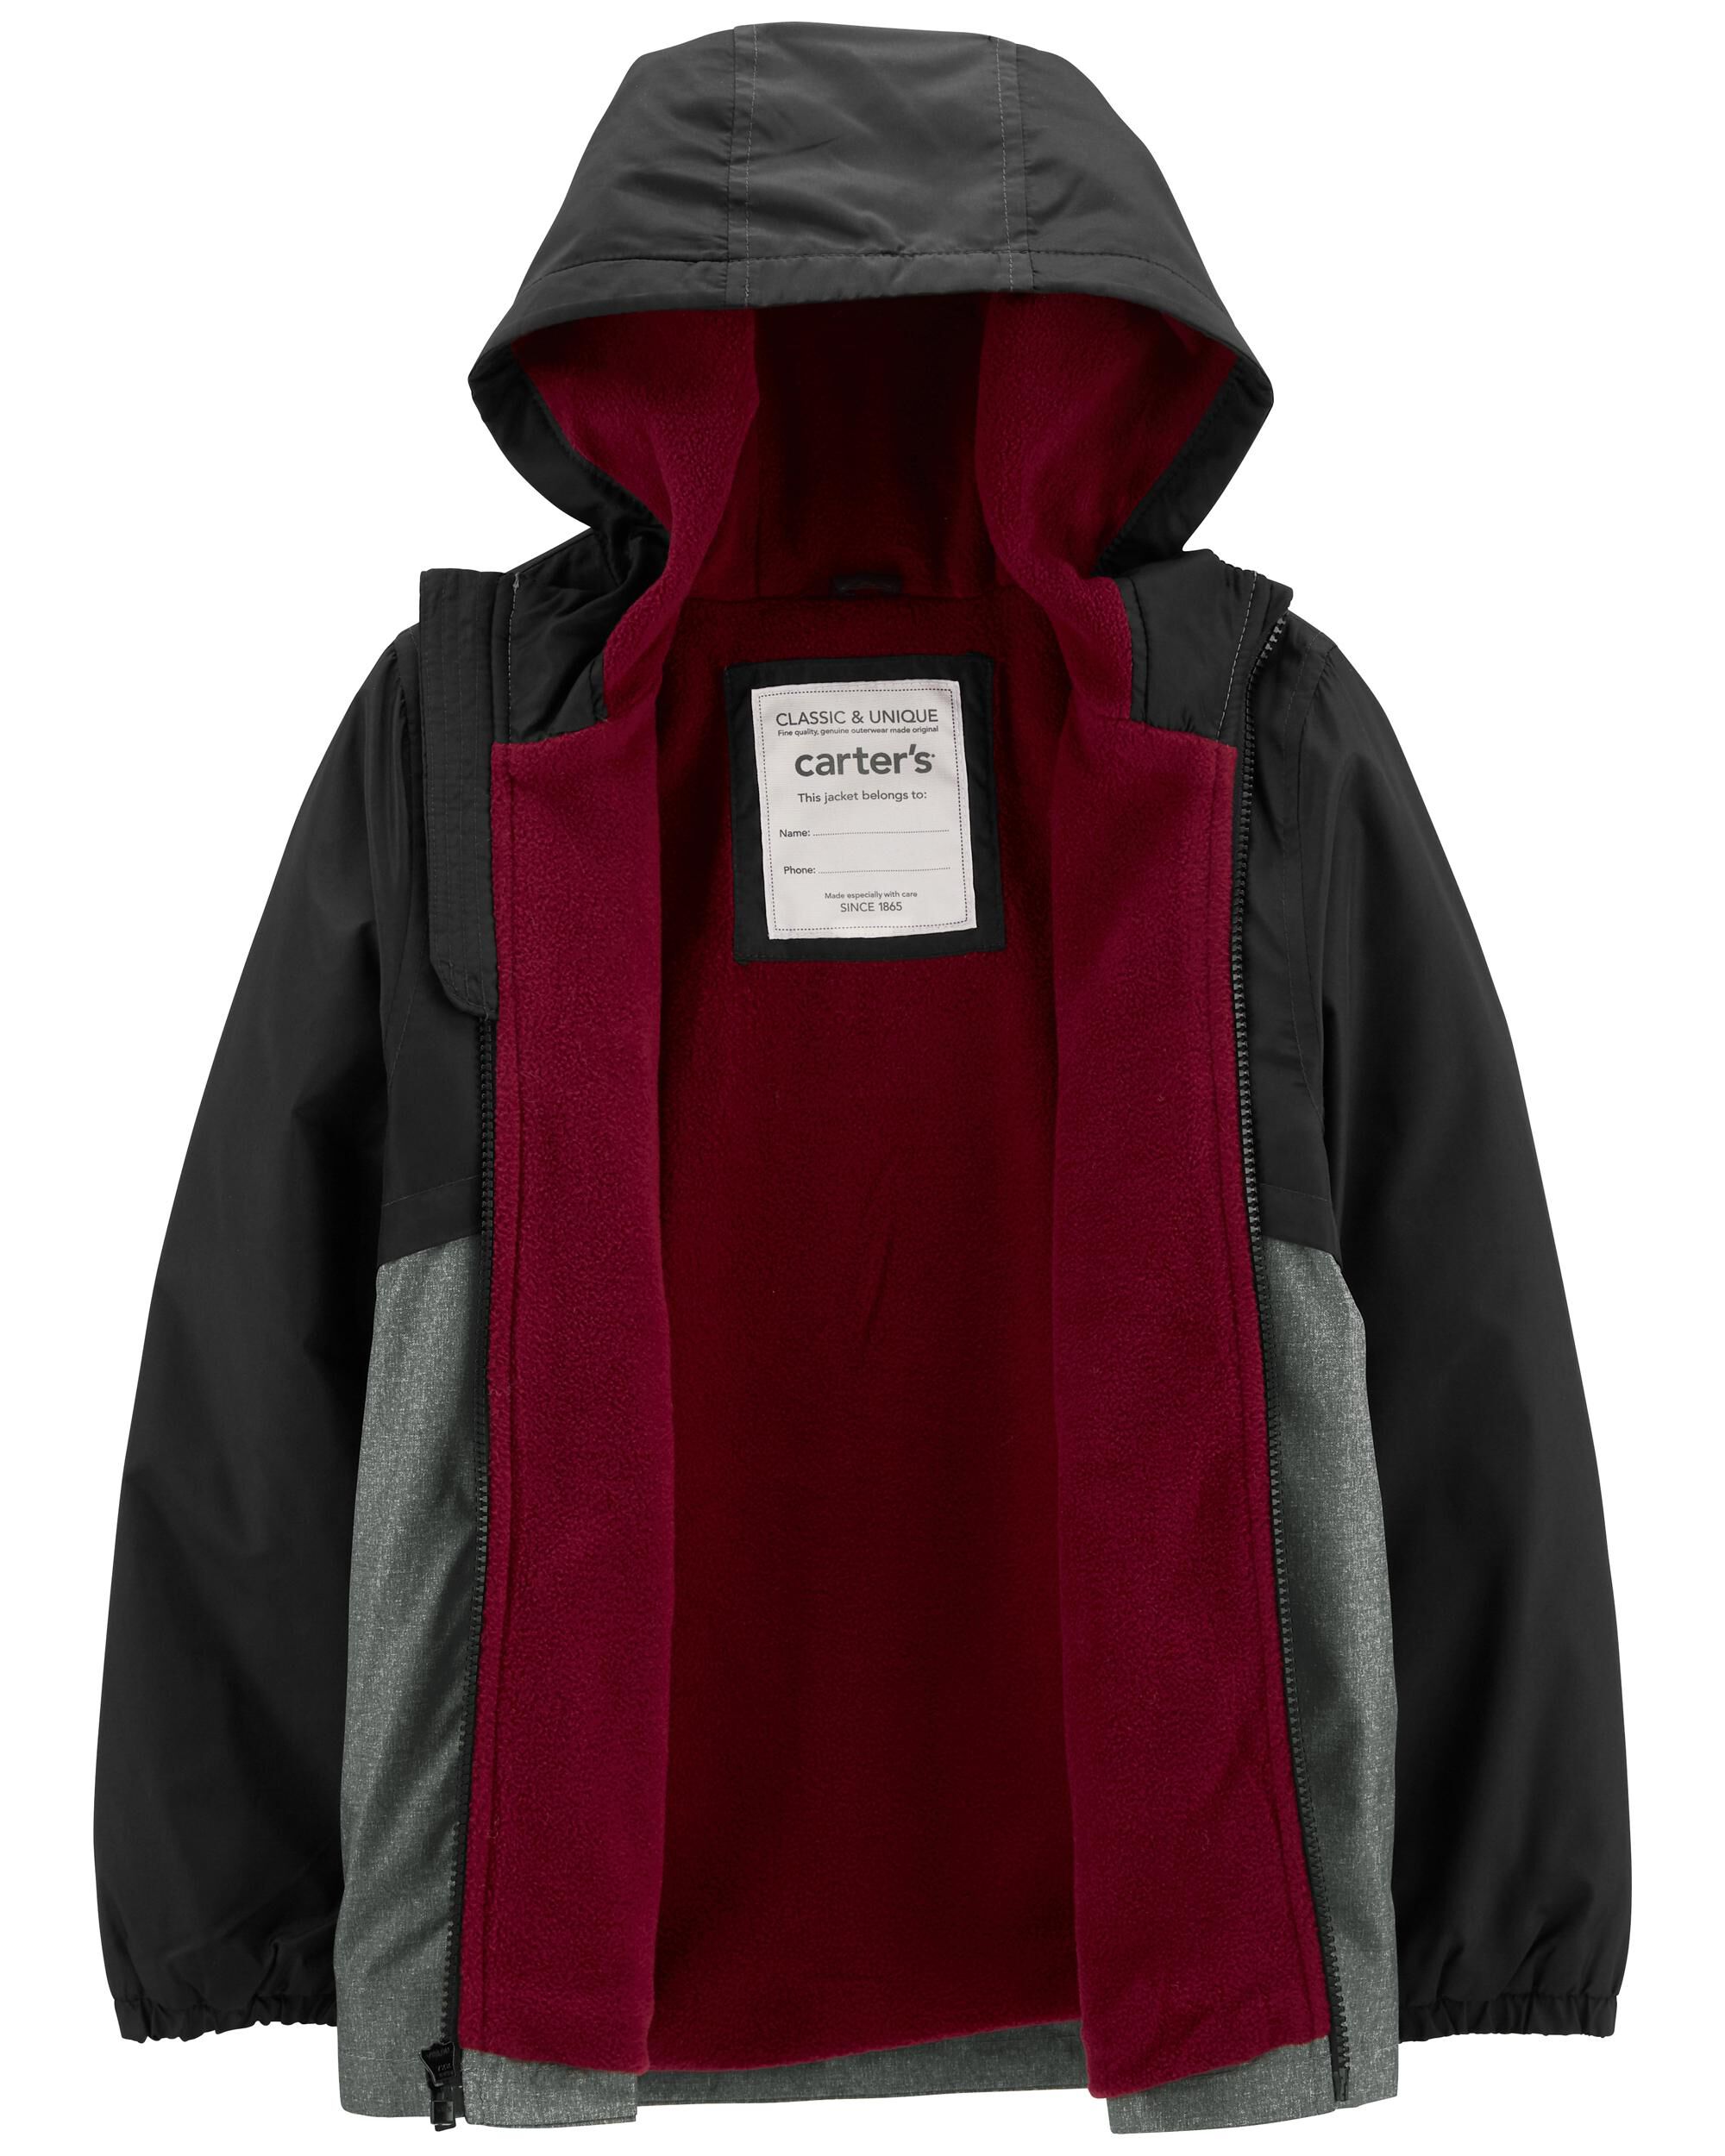 Details about   NWT Oshkosh Boys gray/white/red hood fully lined wind &weather protection Jacket 